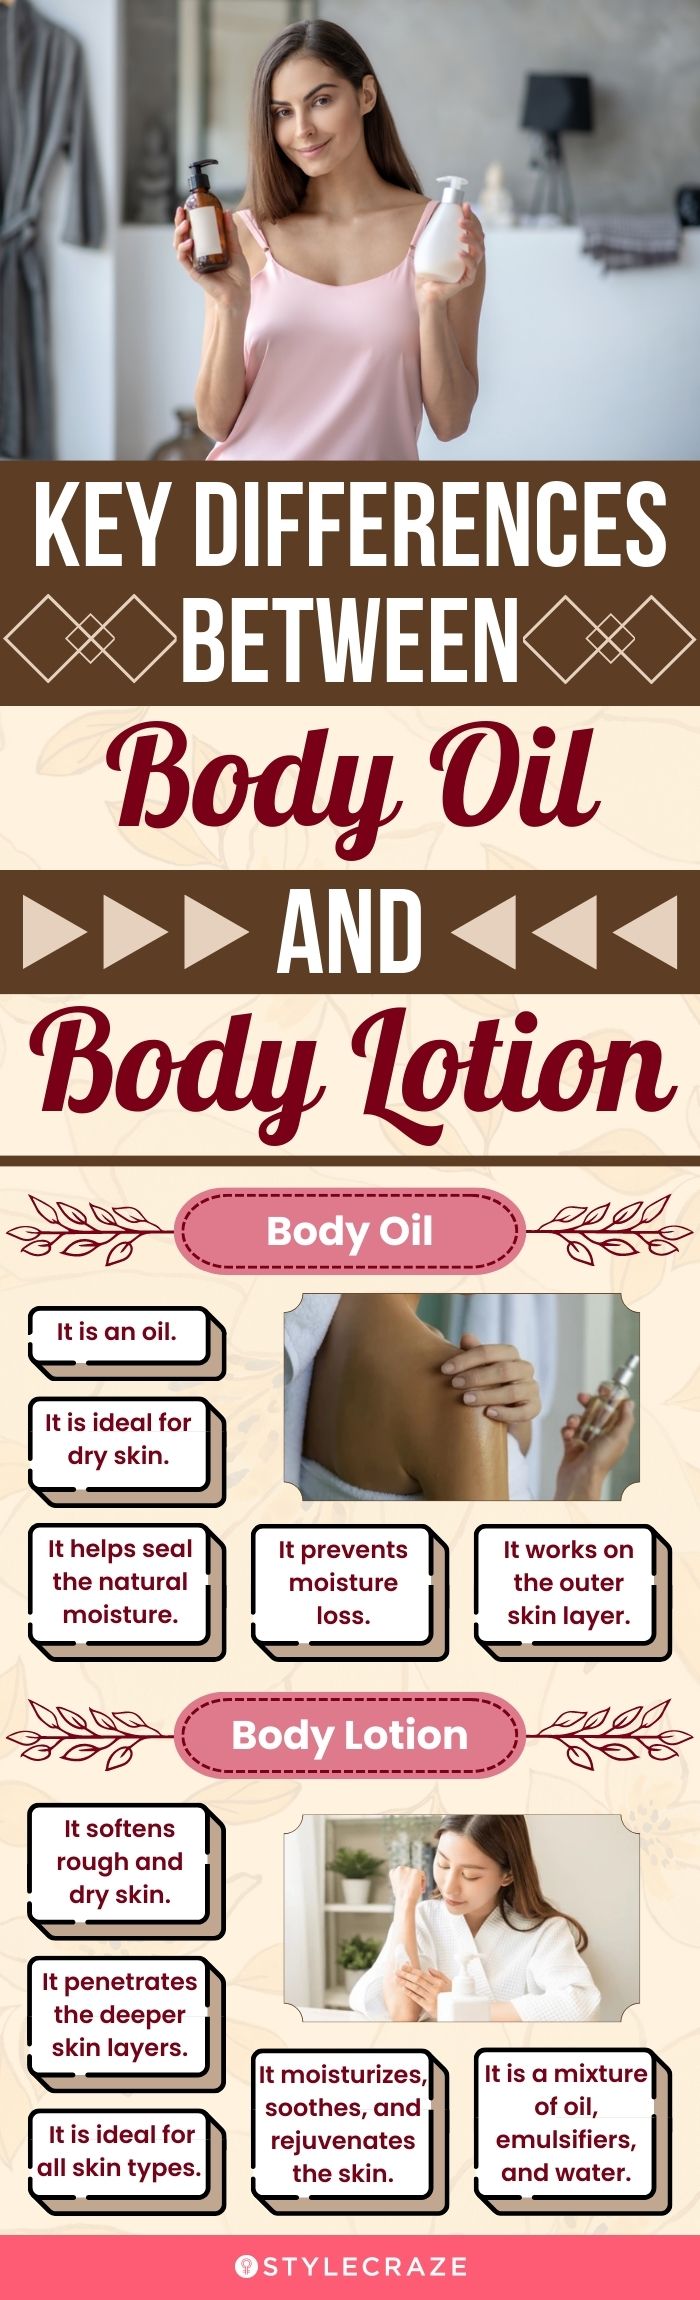 key differences between body oil and body lotion (infographic)